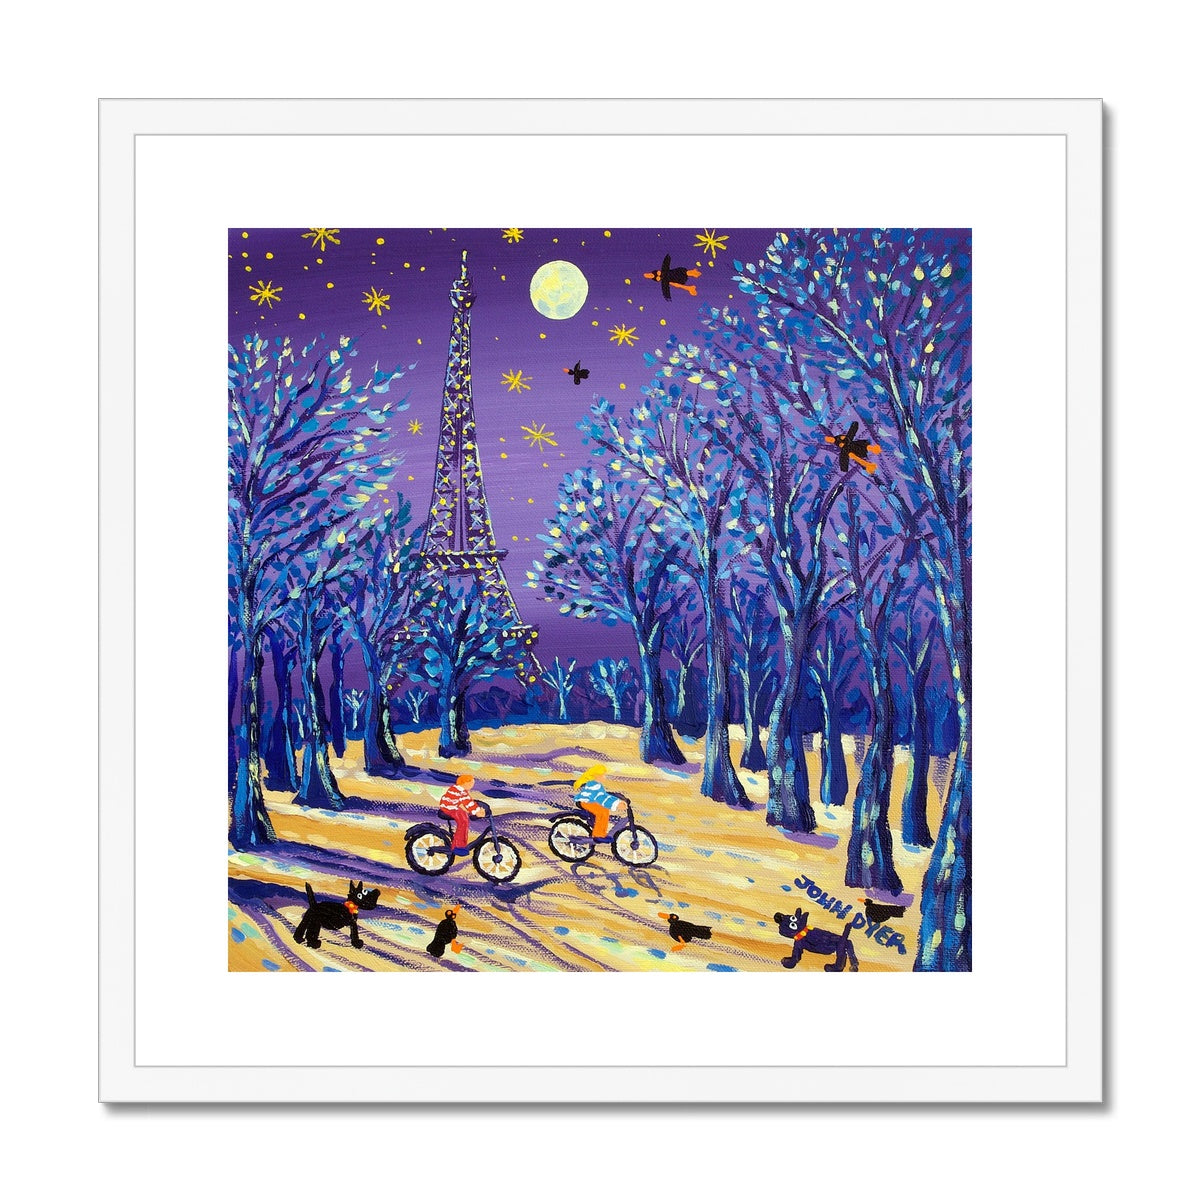 John Dyer Framed Open Edition French Art Print 'Cycling under the Moon, Eiffel Tower, Paris, France' French Art Gallery